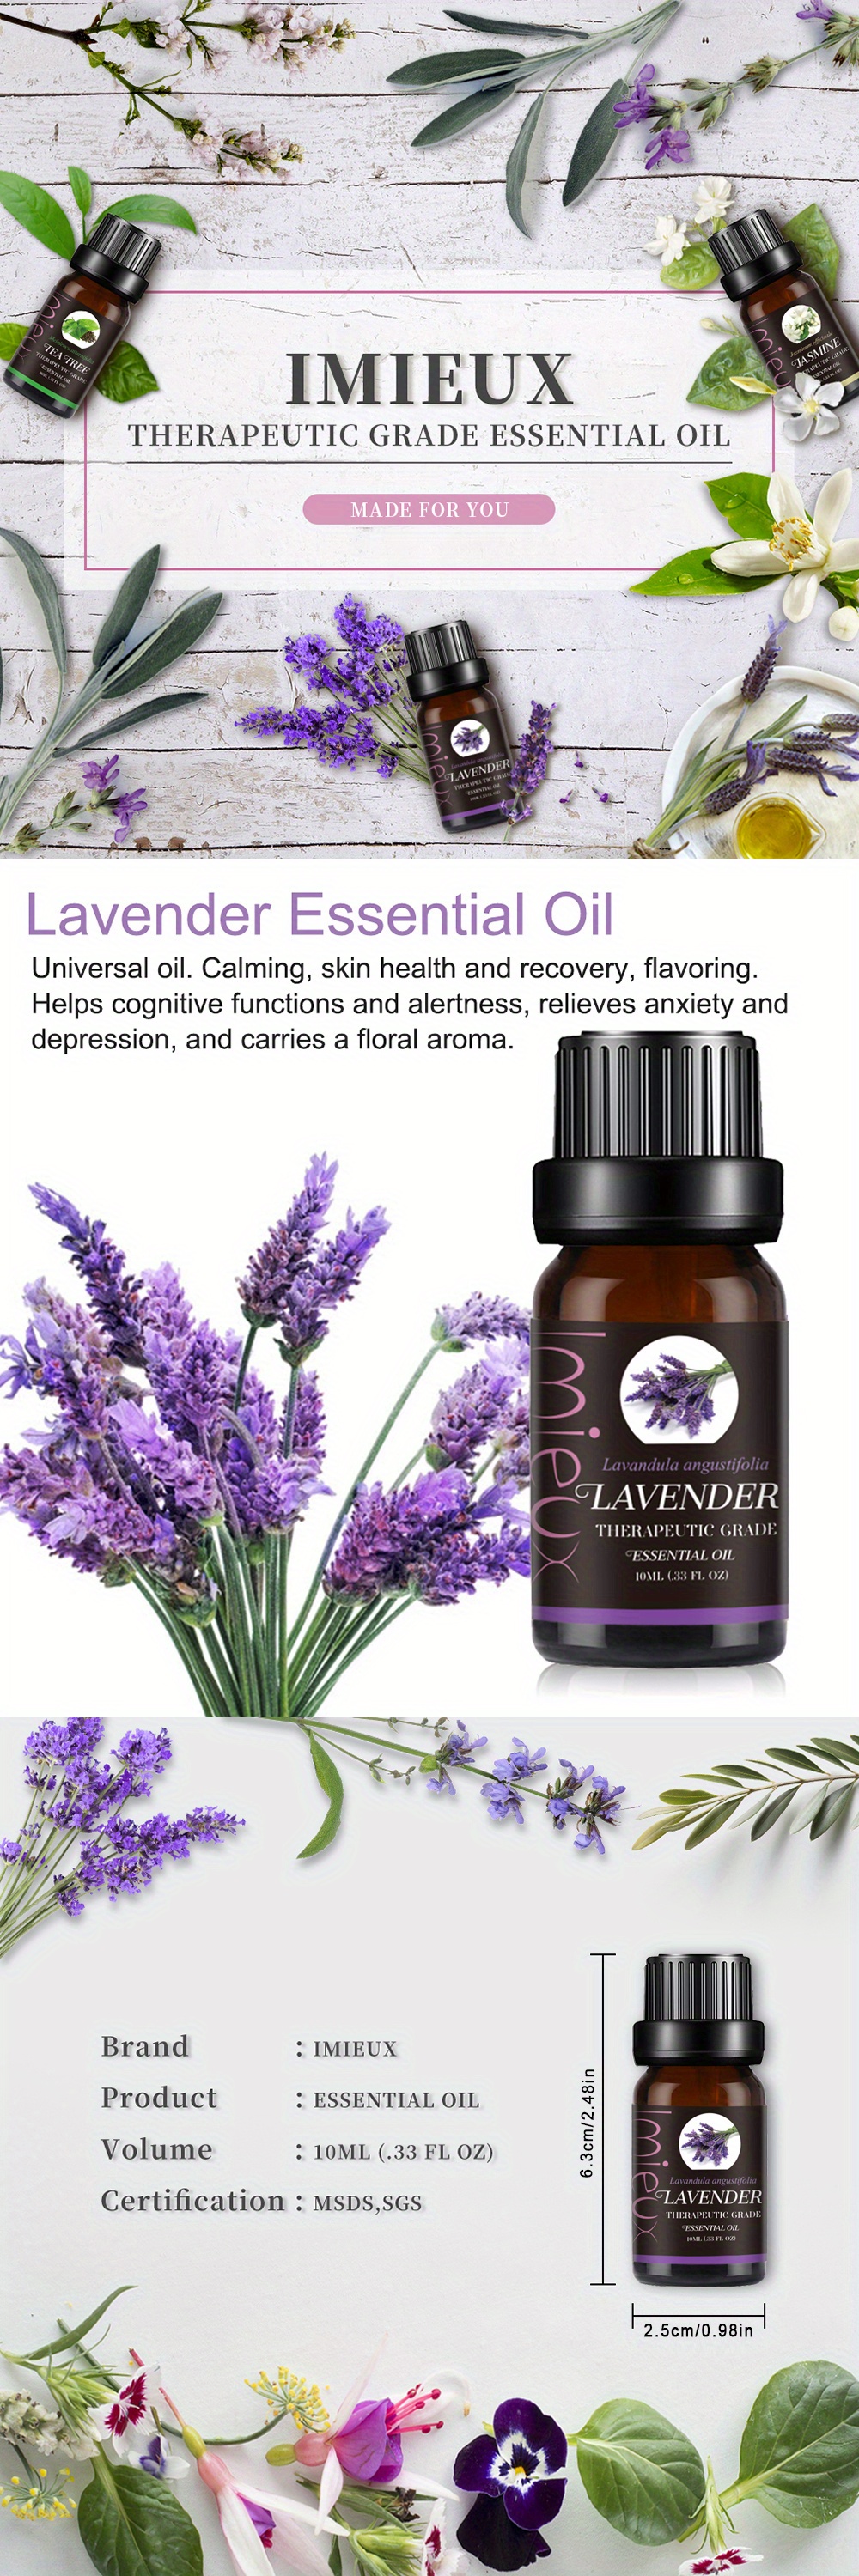 Can You Use Lavender Oil In A Humidifier? – Moksha Lifestyle Products